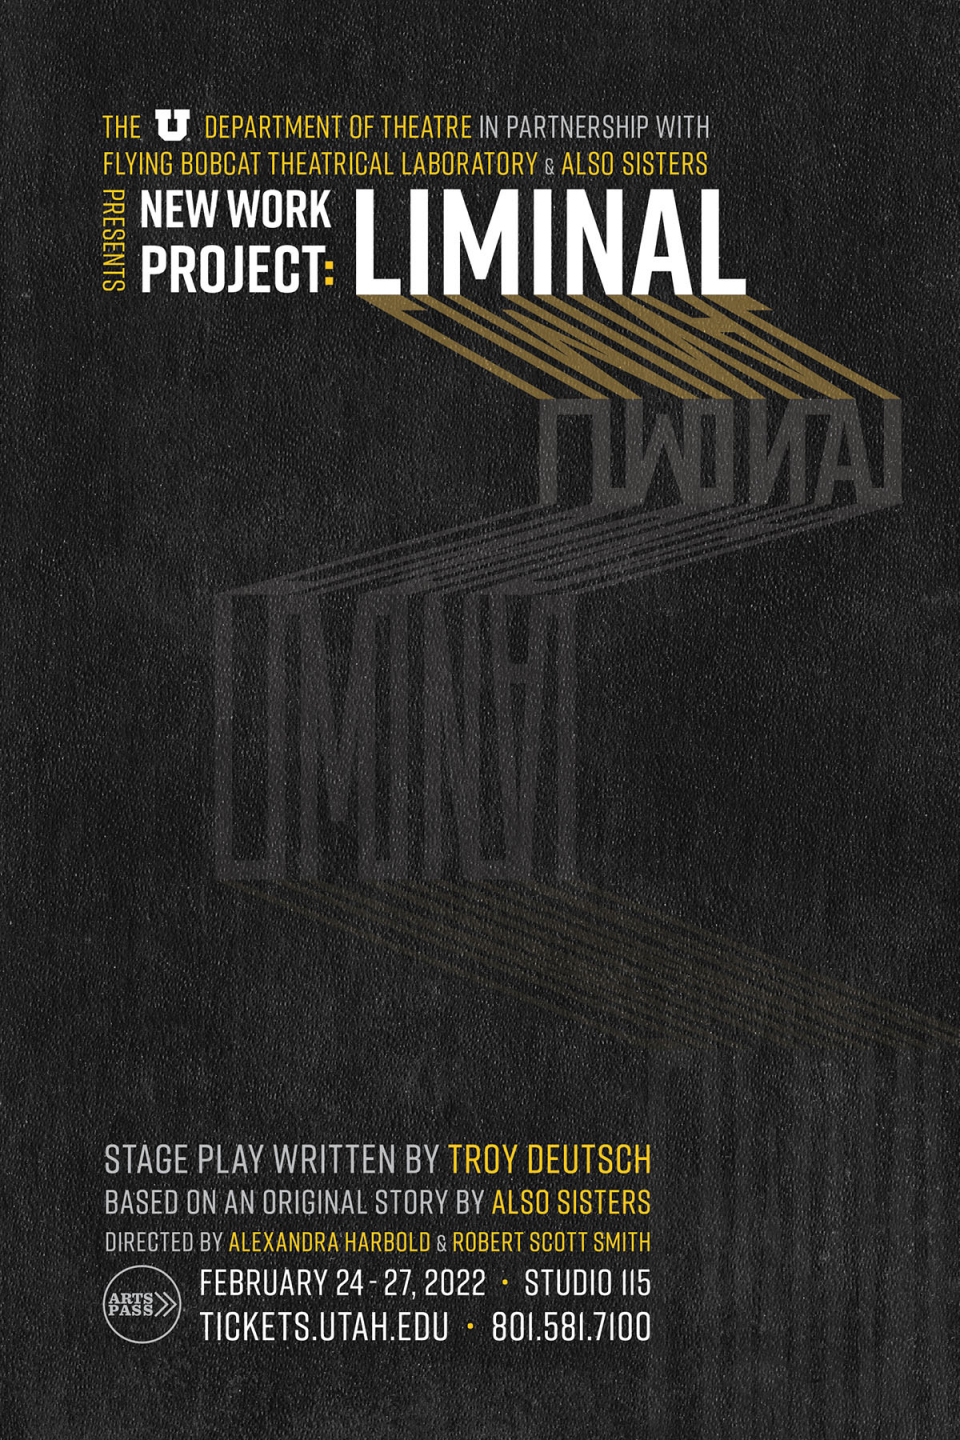 New Work Project: Liminal